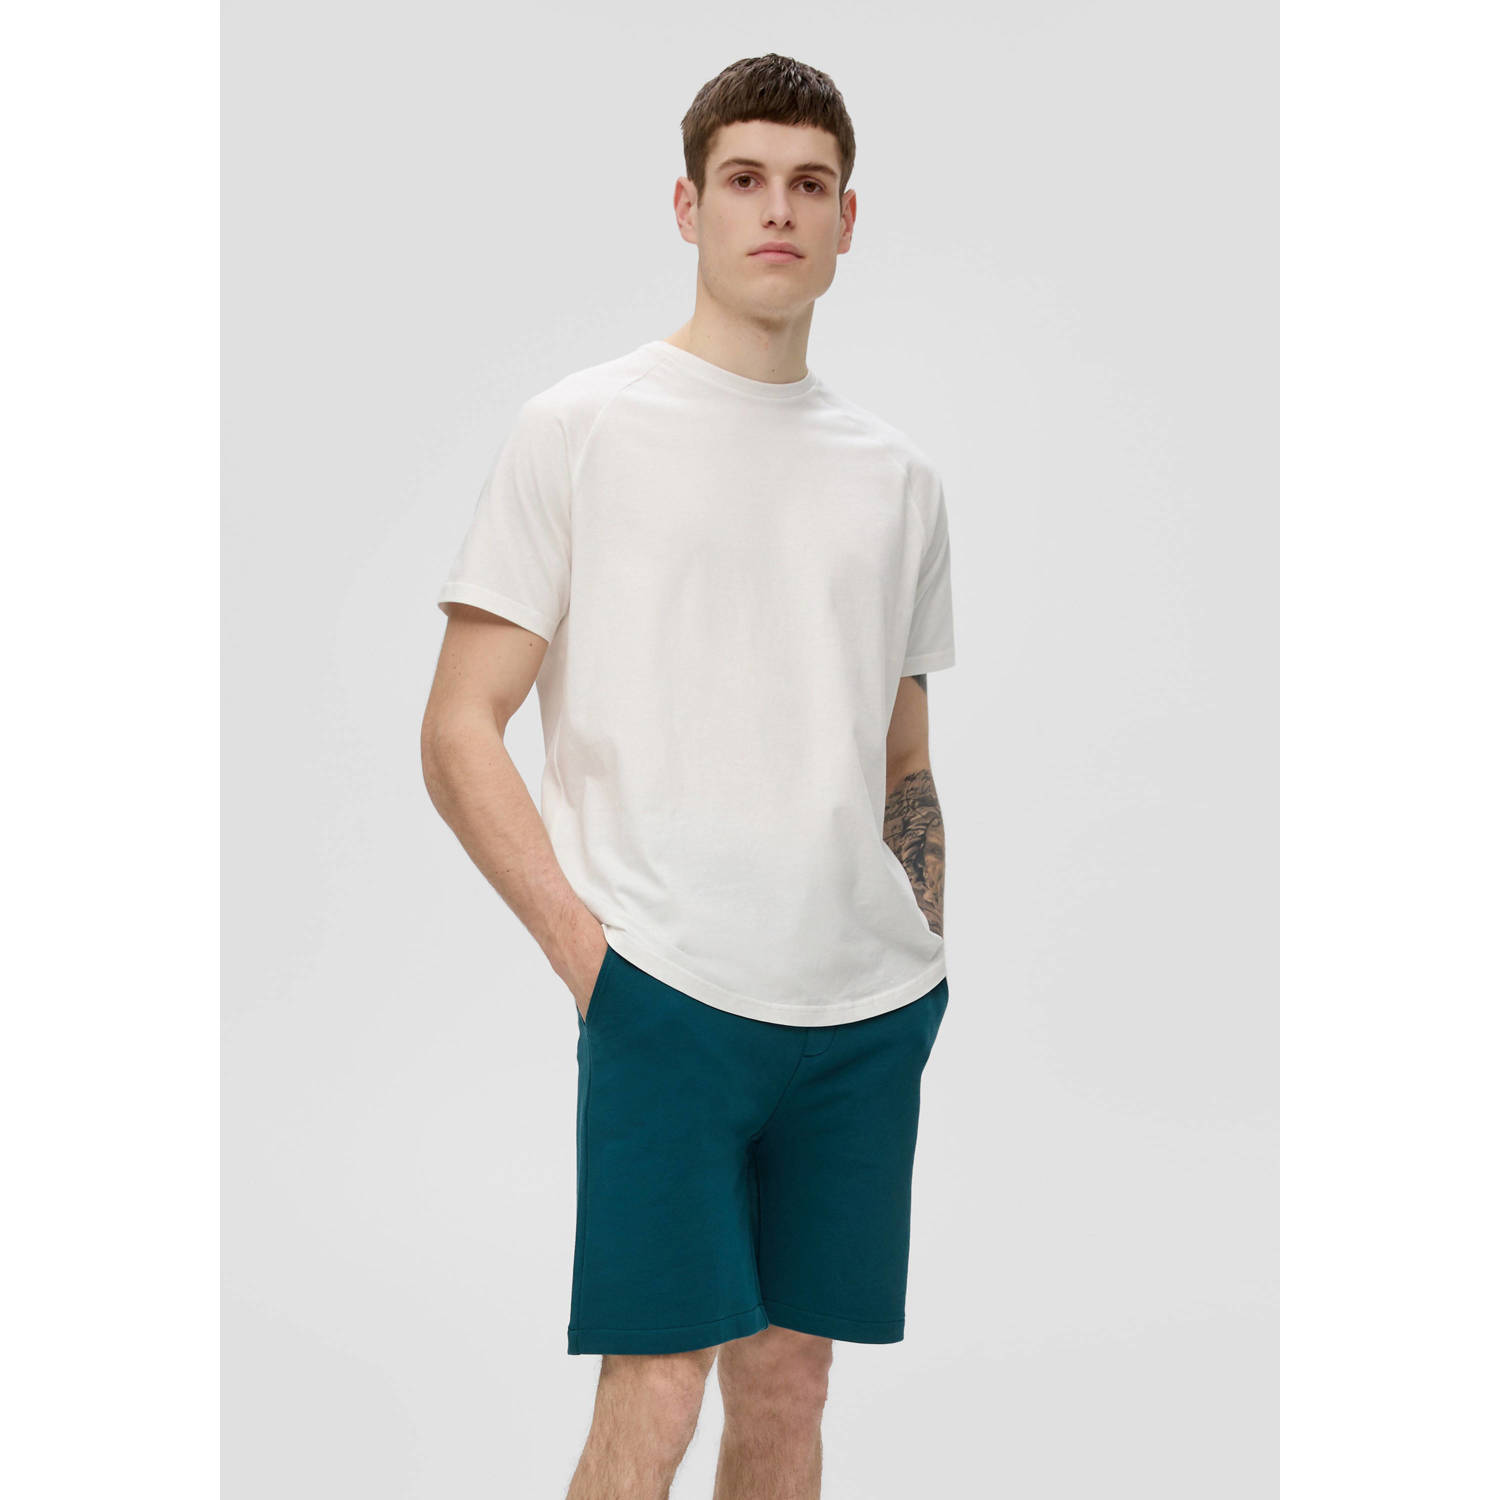 Q S by s.Oliver cargo short petrol